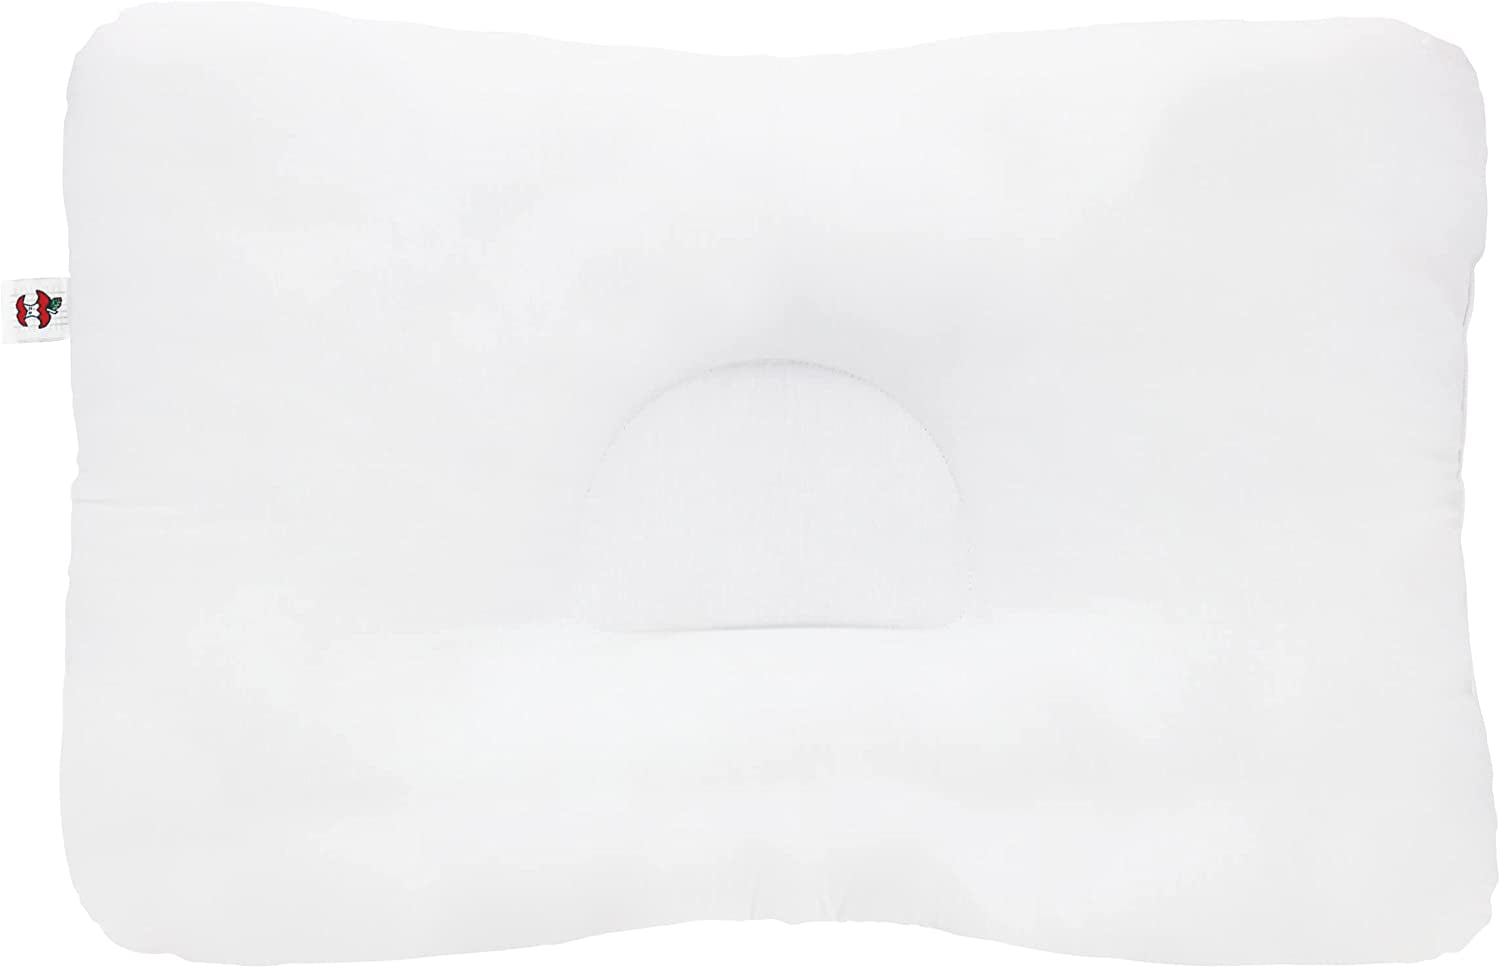 Core Products D-Core Cervical Support Pillow, Standard Firm, Midsize